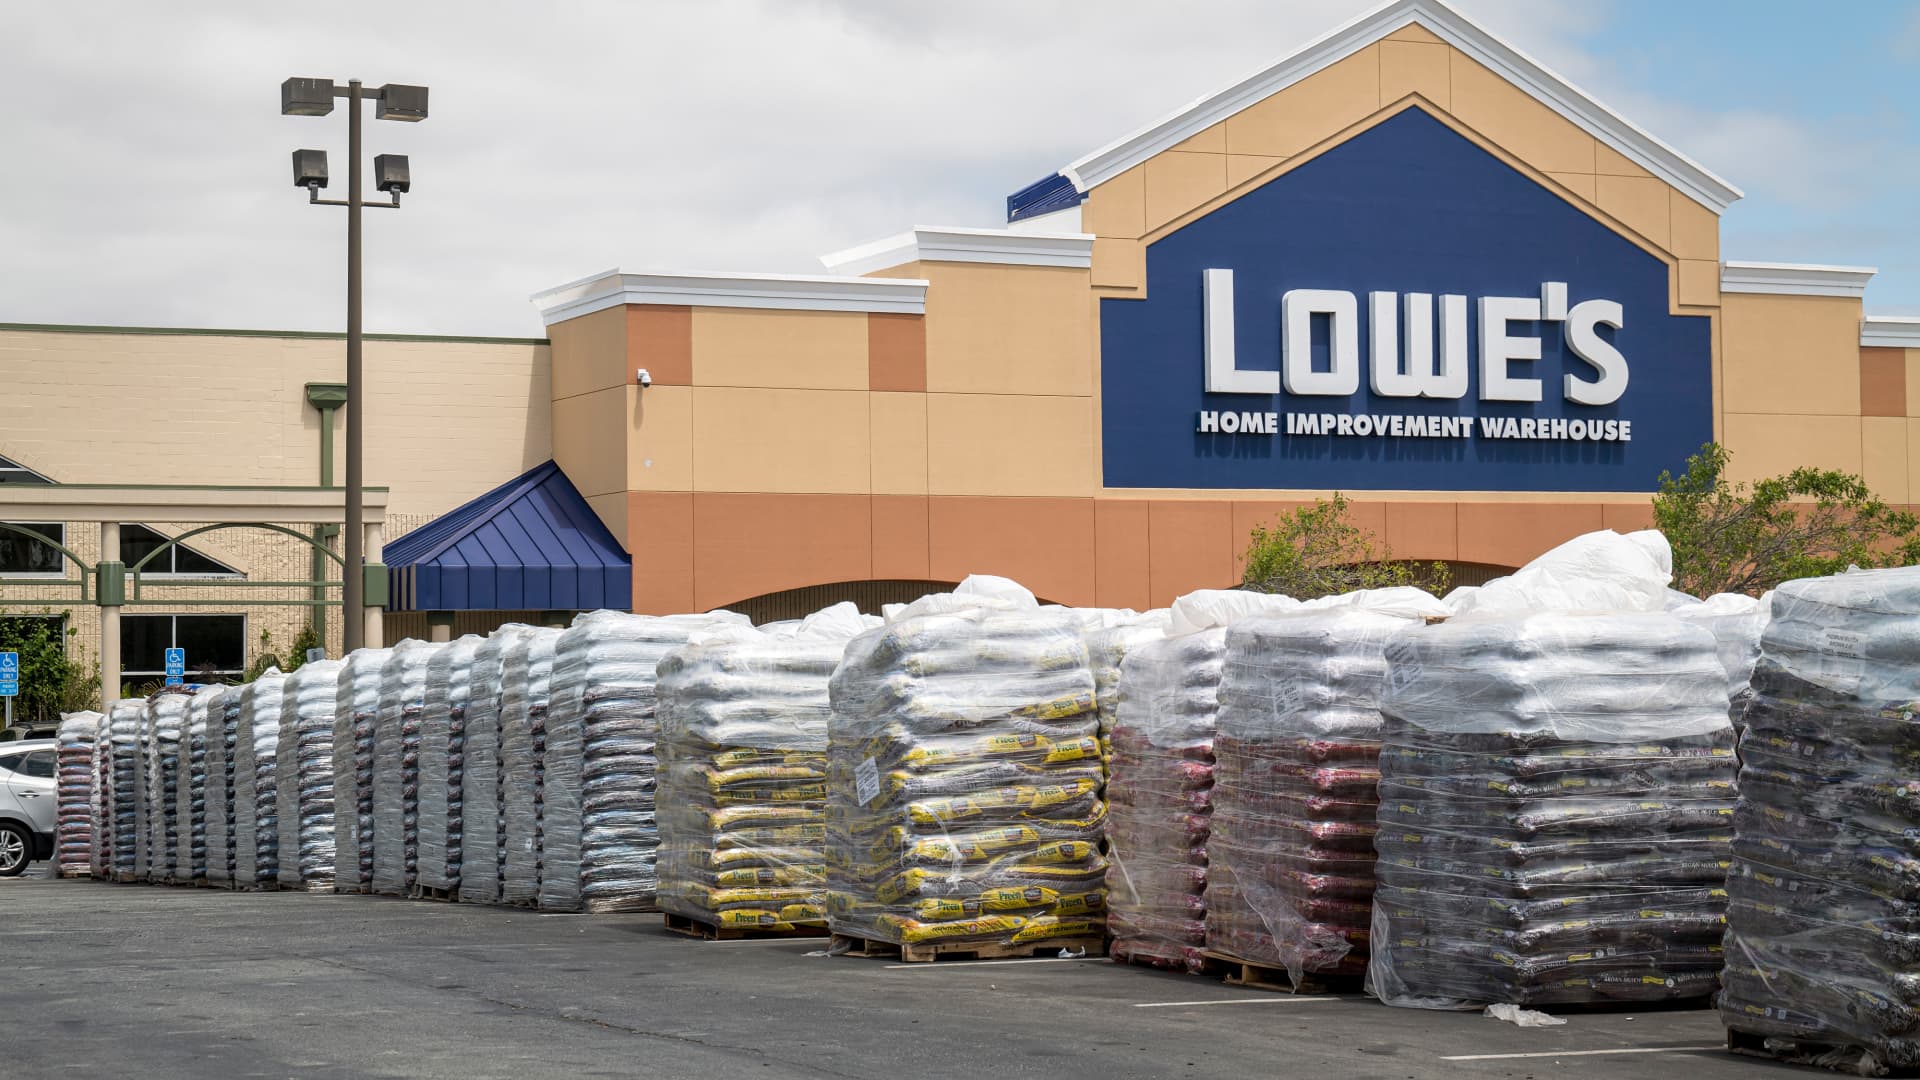 Pallets of garden supplies sit stacked in the parking lot of a Lowe's store in San Bruno, California.